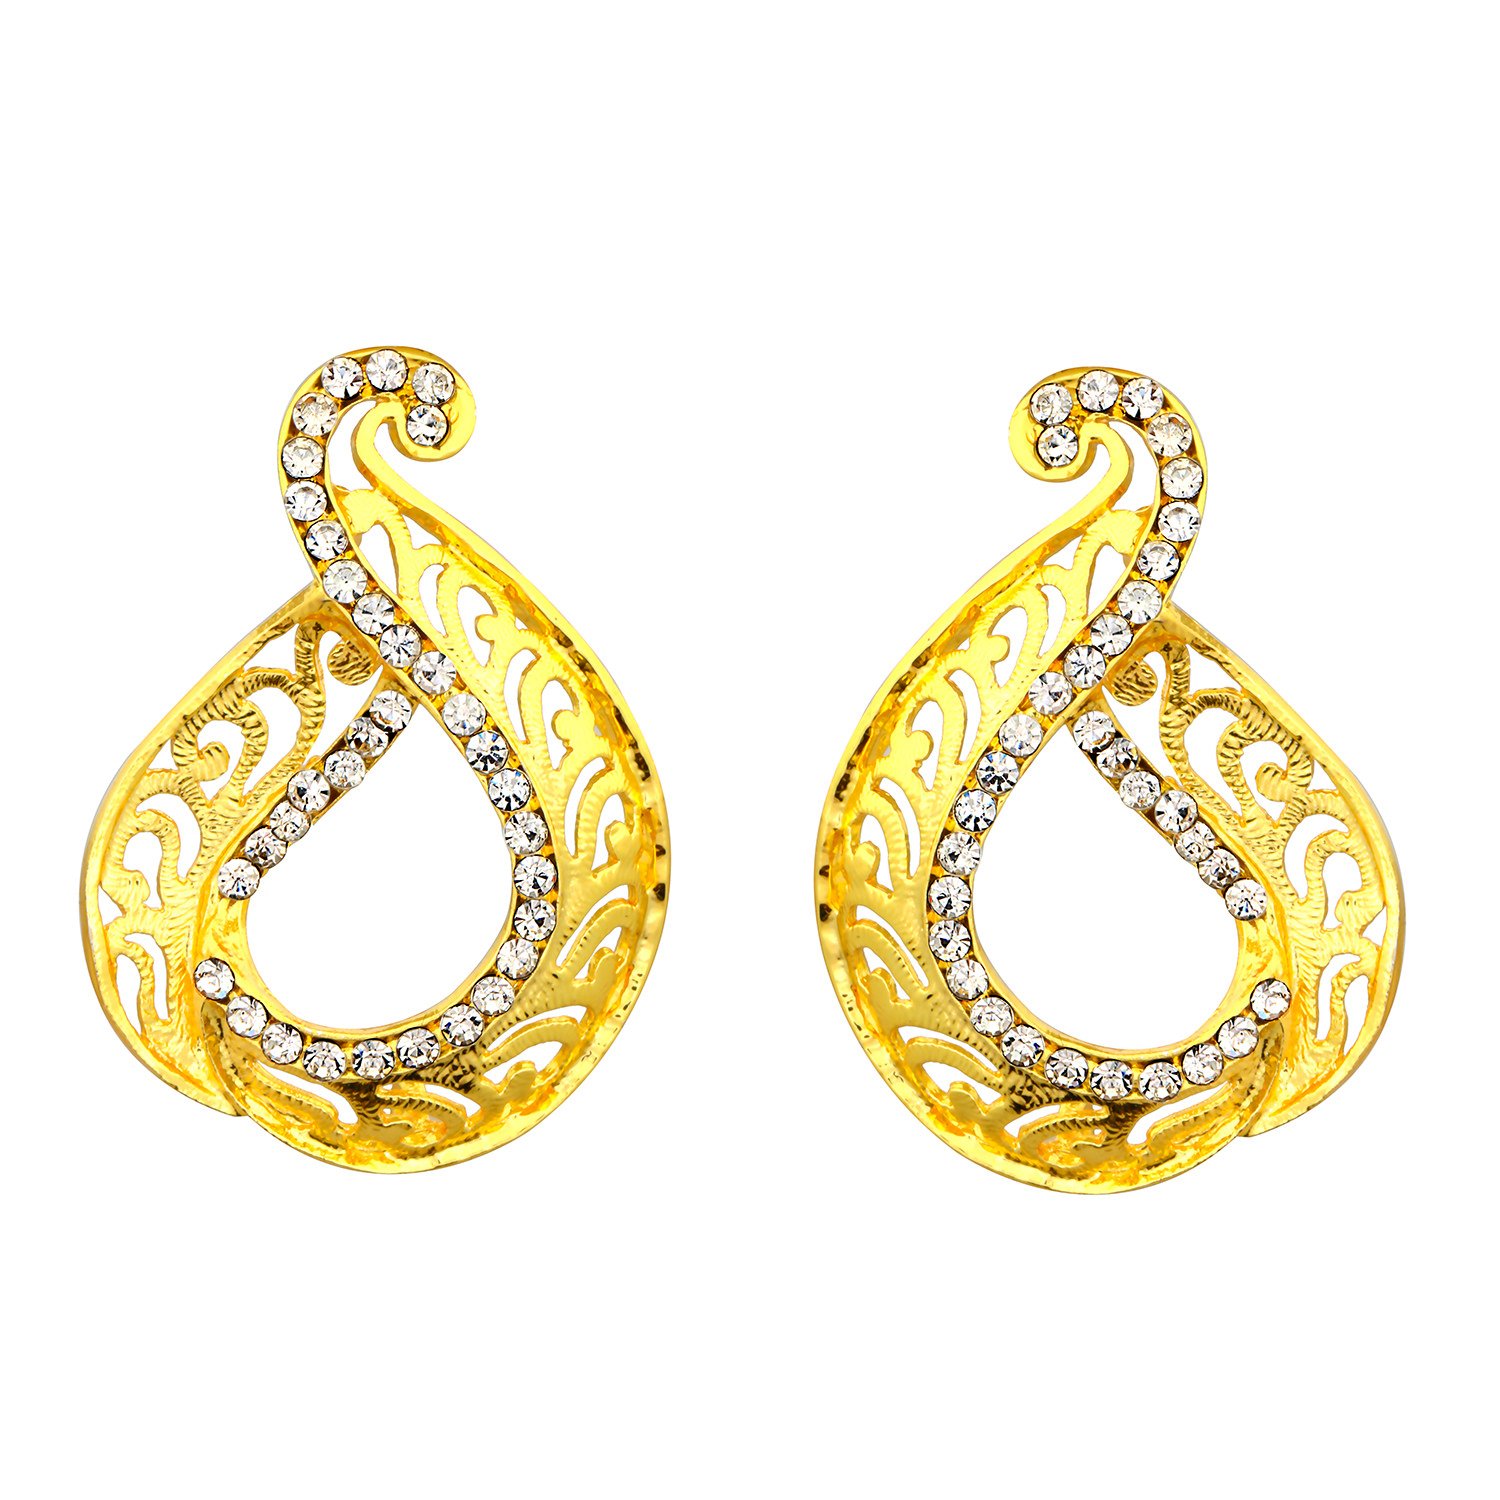 AccessHer Gold Oversized Stud Earrings for Women Price in India